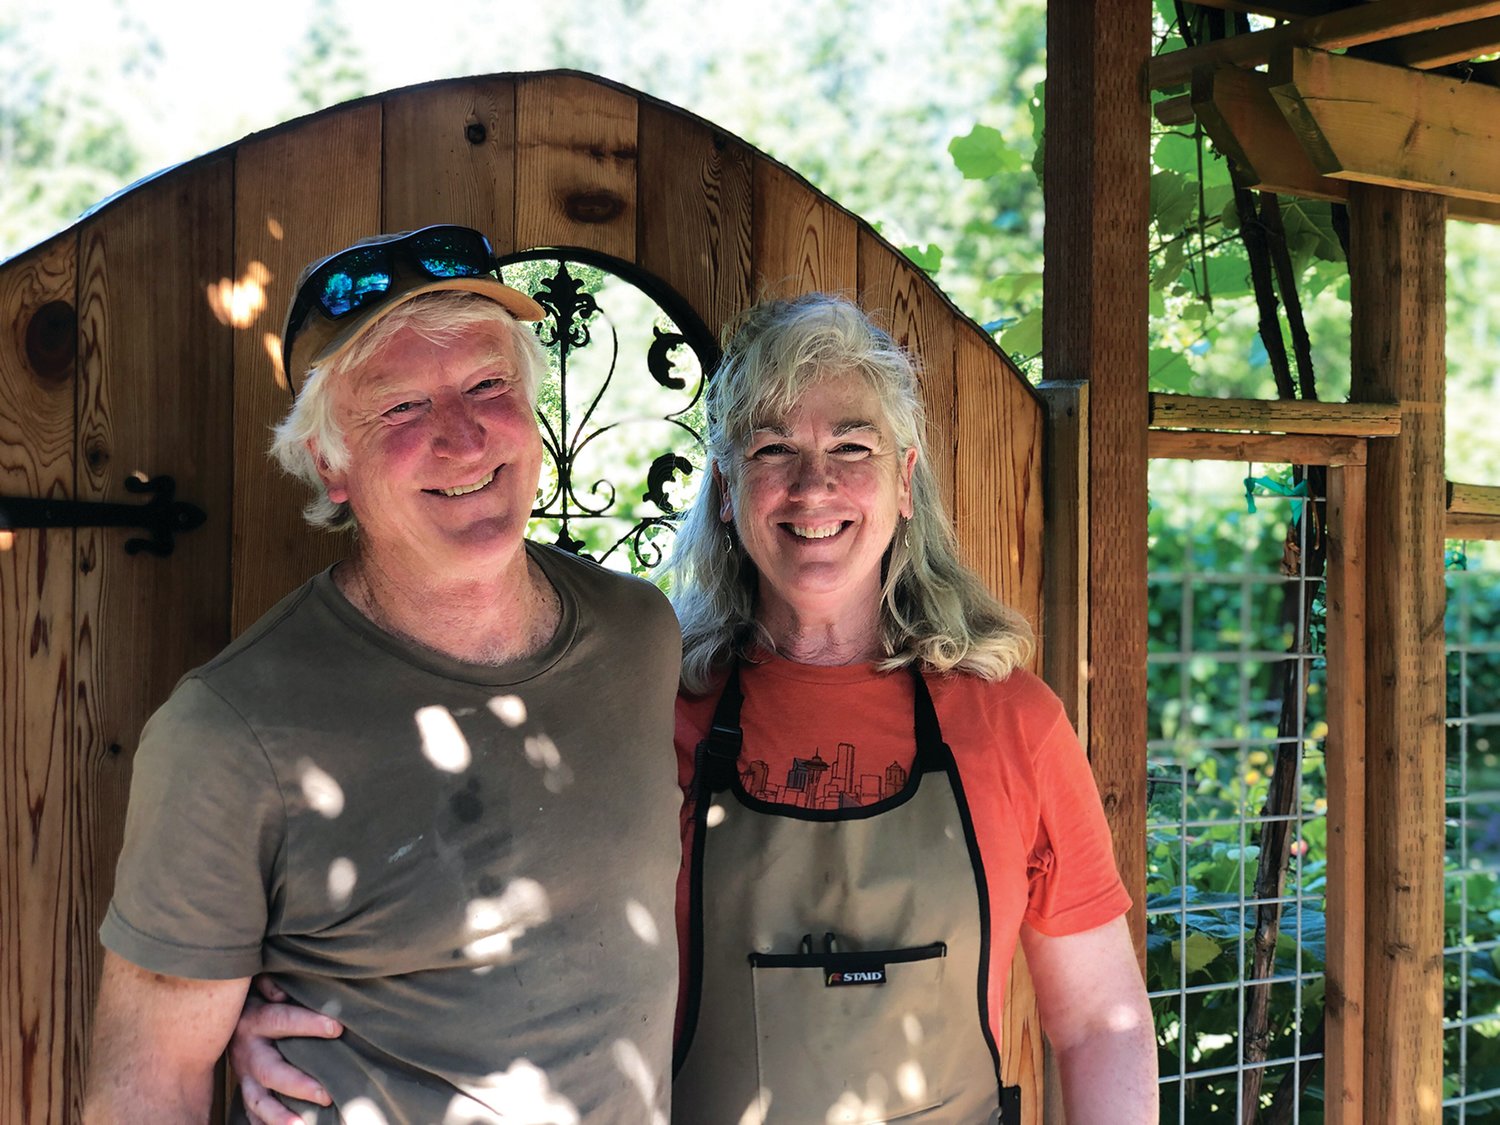 Partners and co-owners Mike Gaede and Margaret Stoermert keep things humming at Raincoast Farms